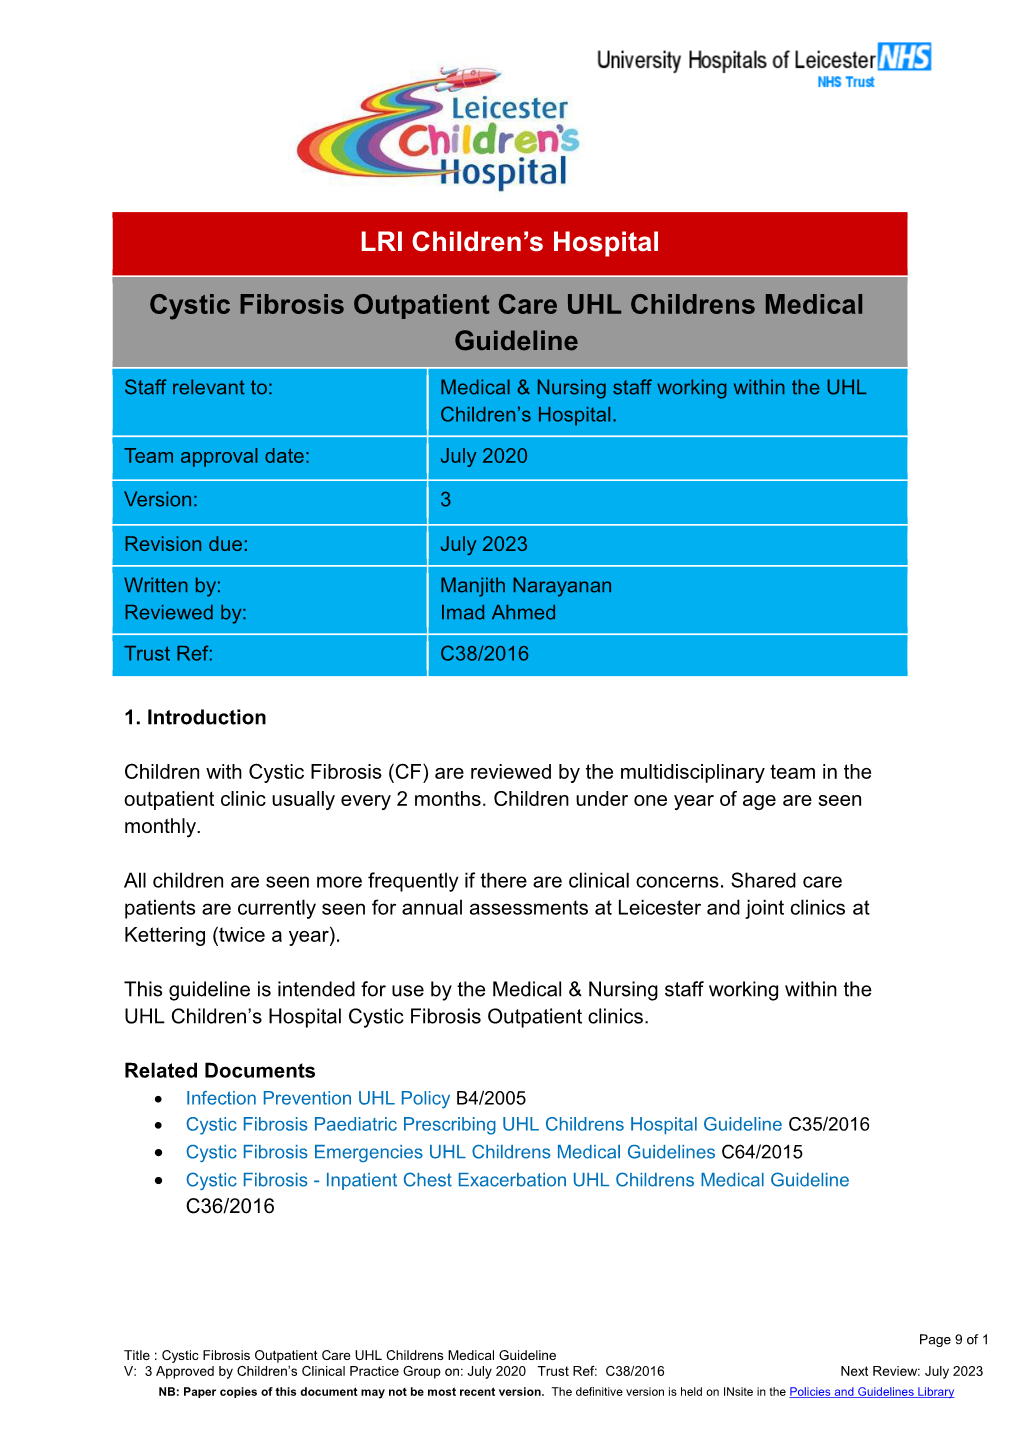 Cystic Fibrosis Outpatient Care UHL Childrens Medical Guideline